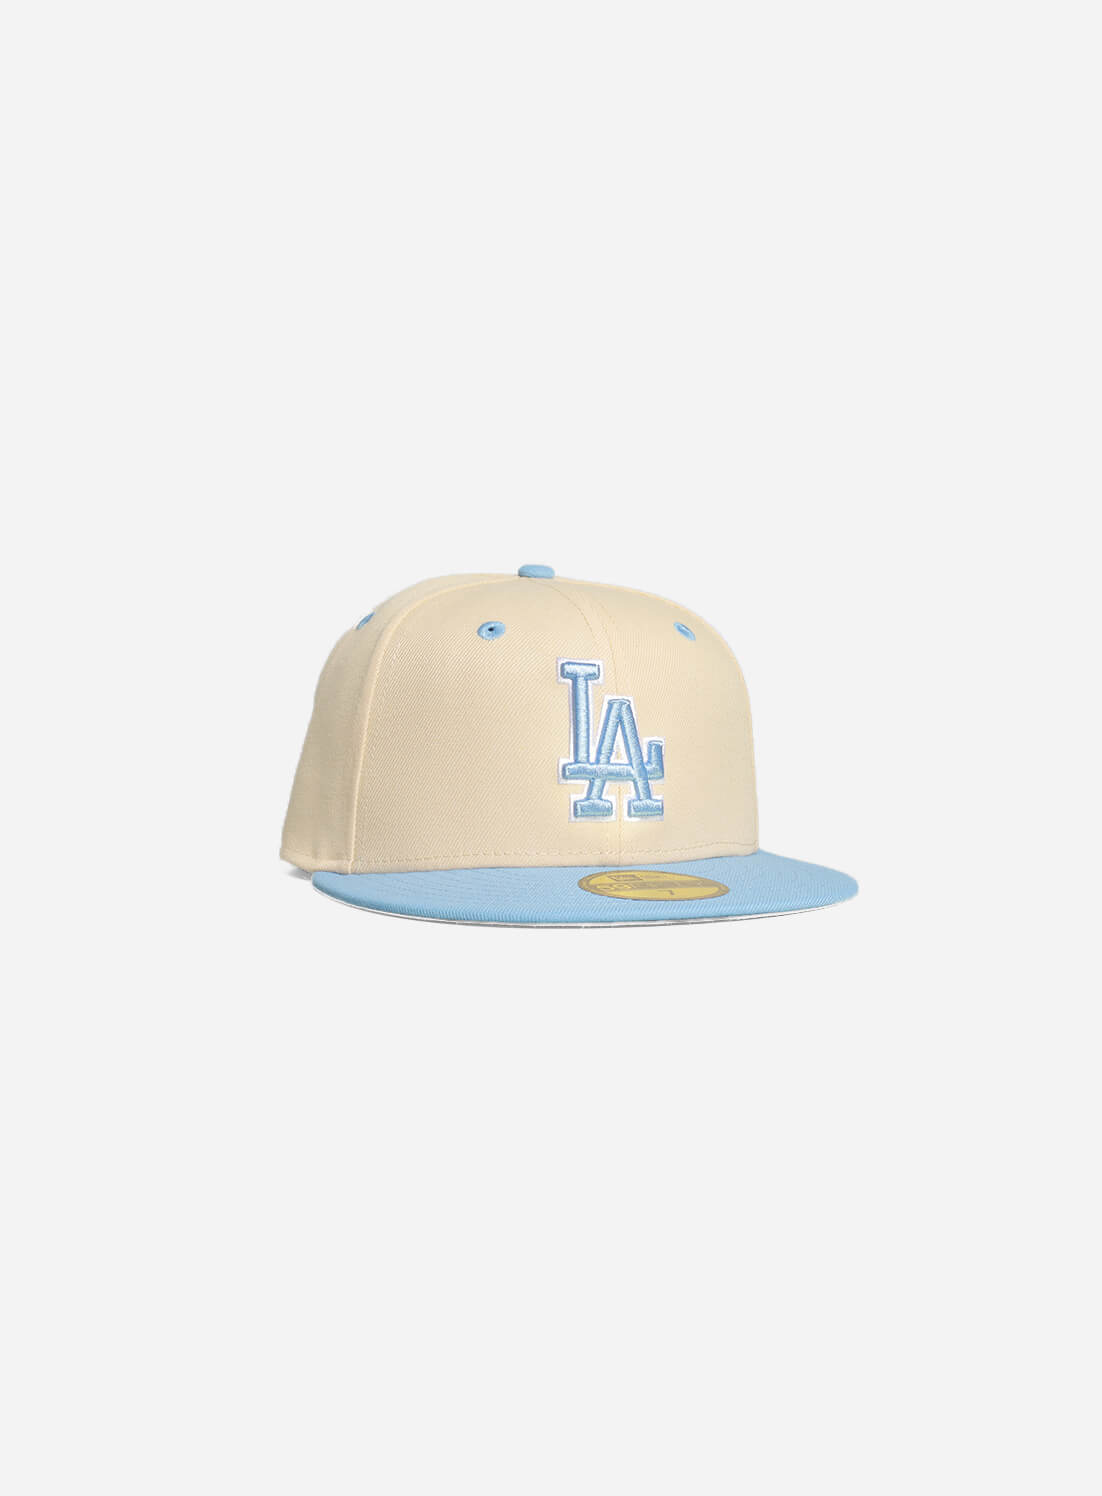 Los Angeles Dodgers Iced Latte 59Fifty Fitted